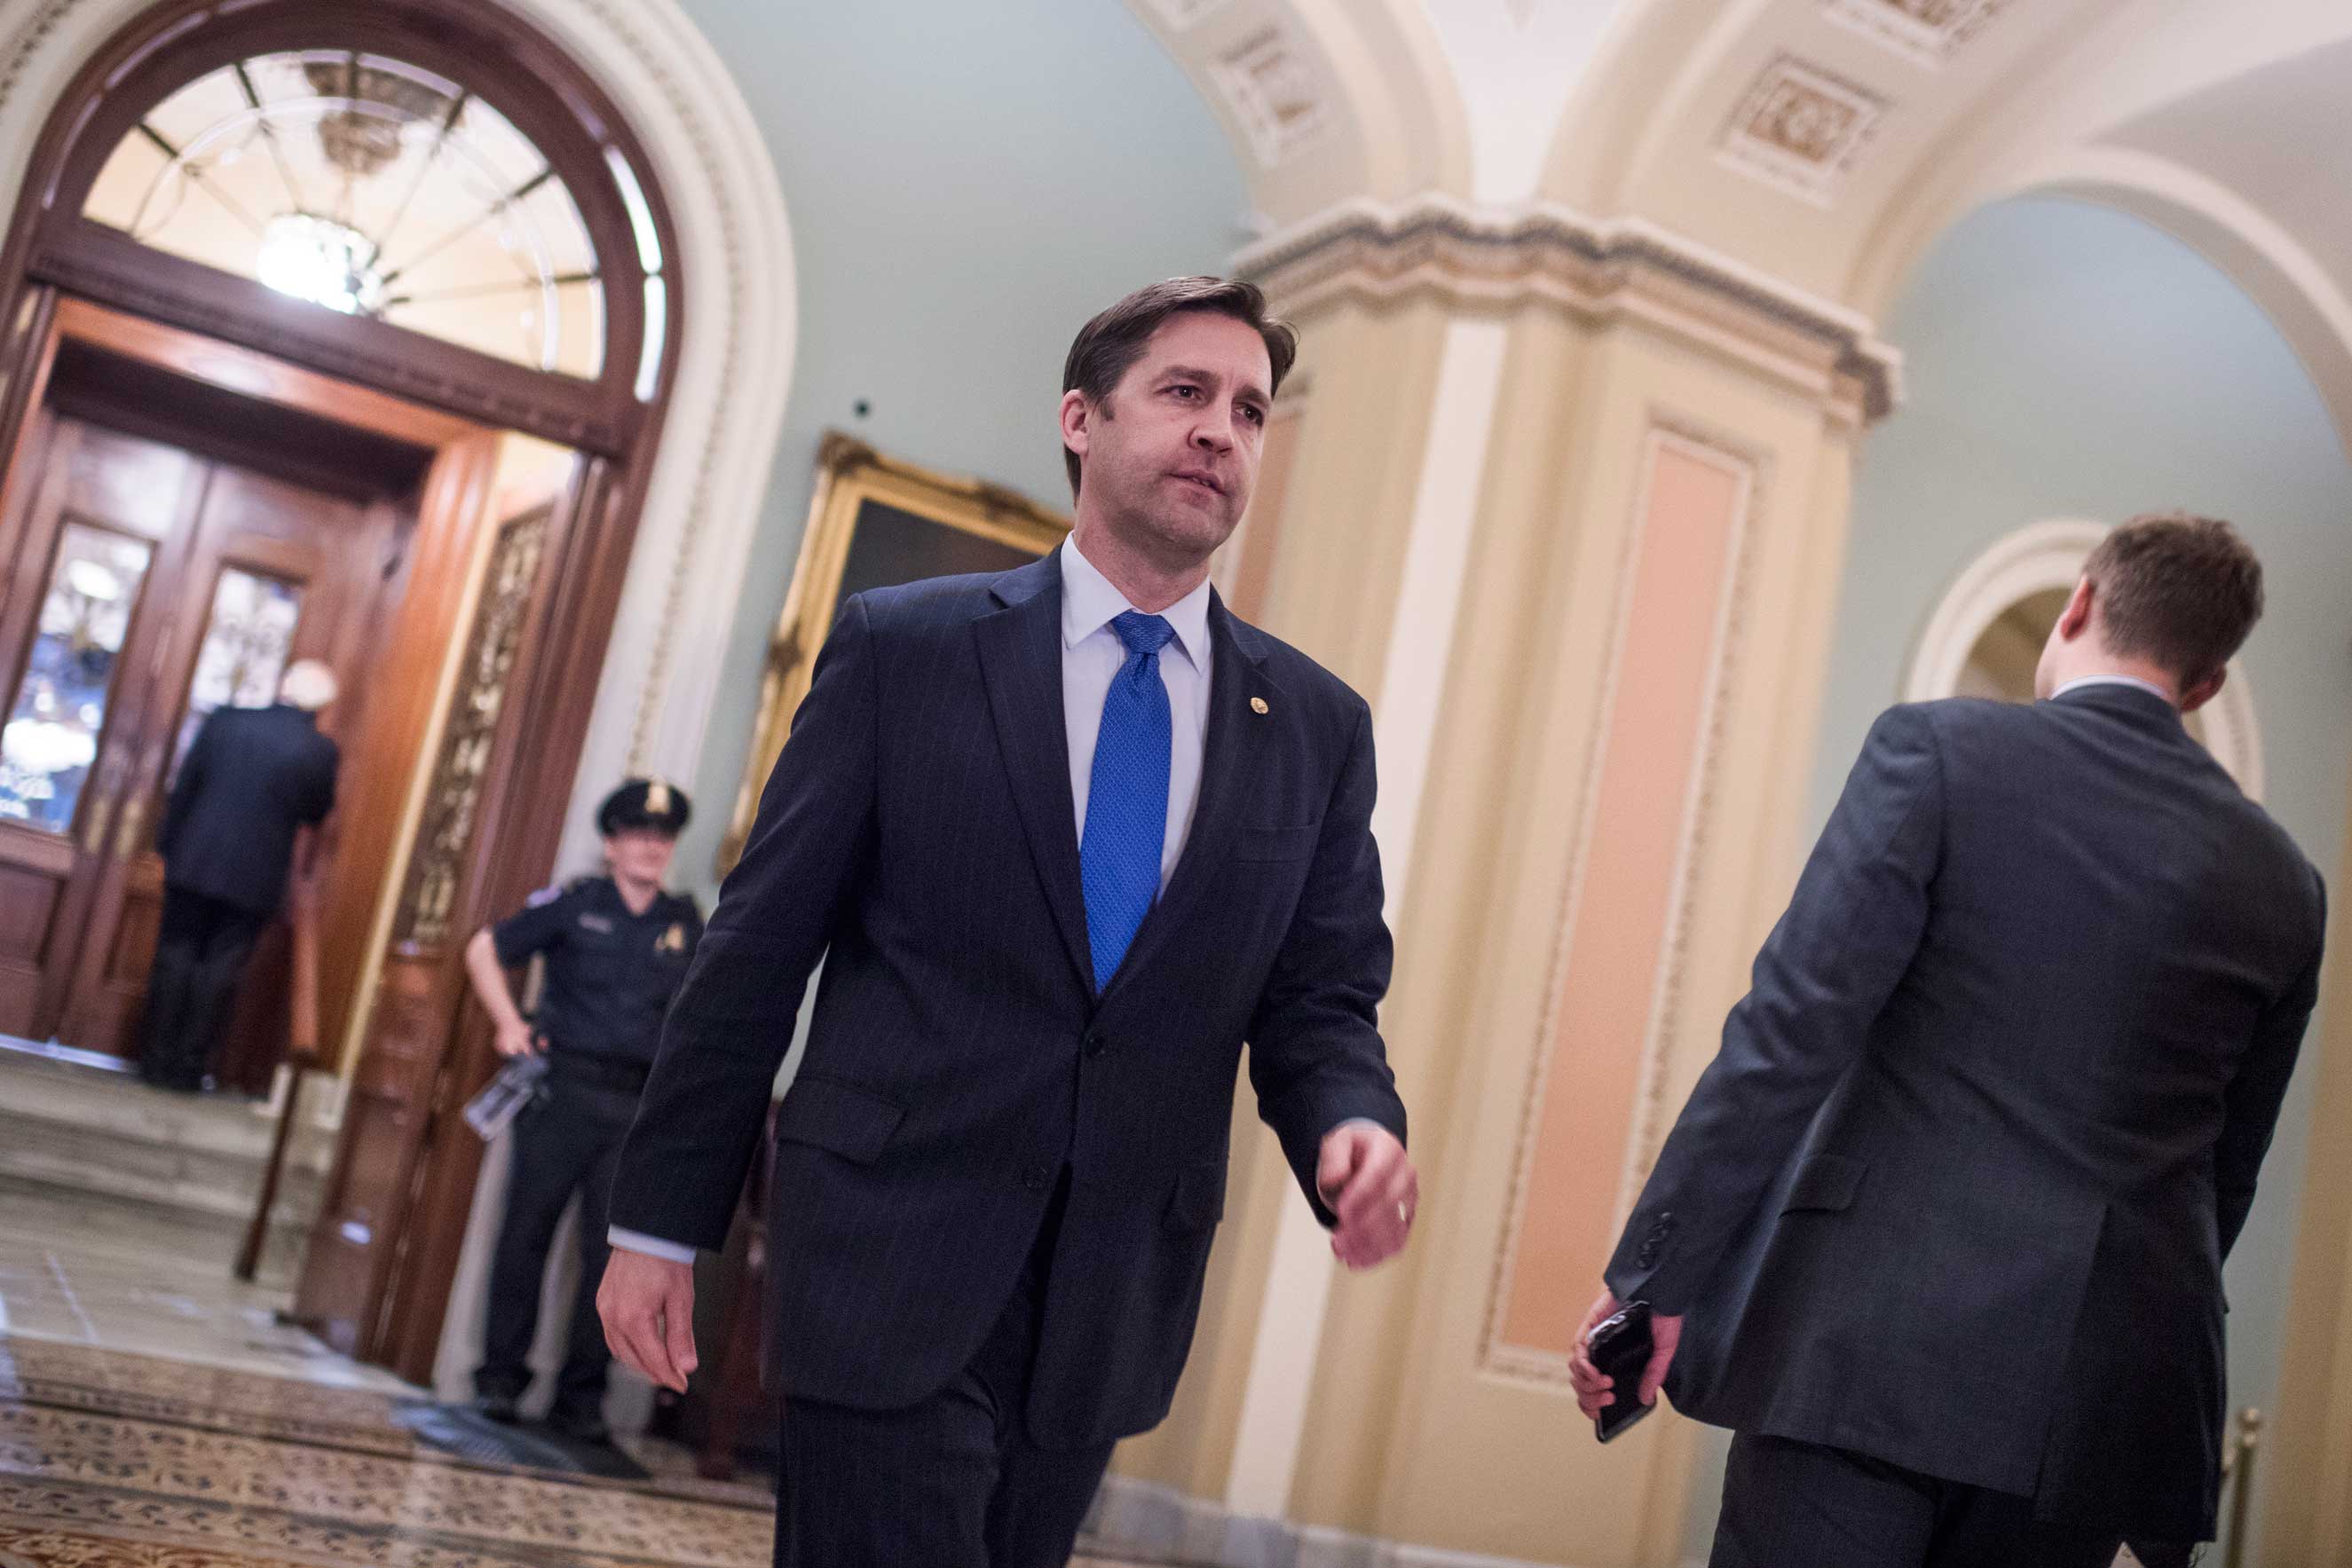 Sen. Ben Sasse, R-Neb., is seen in the Capitol's Ohio Clock Corridor after a vote in the Senate where they invoked the 